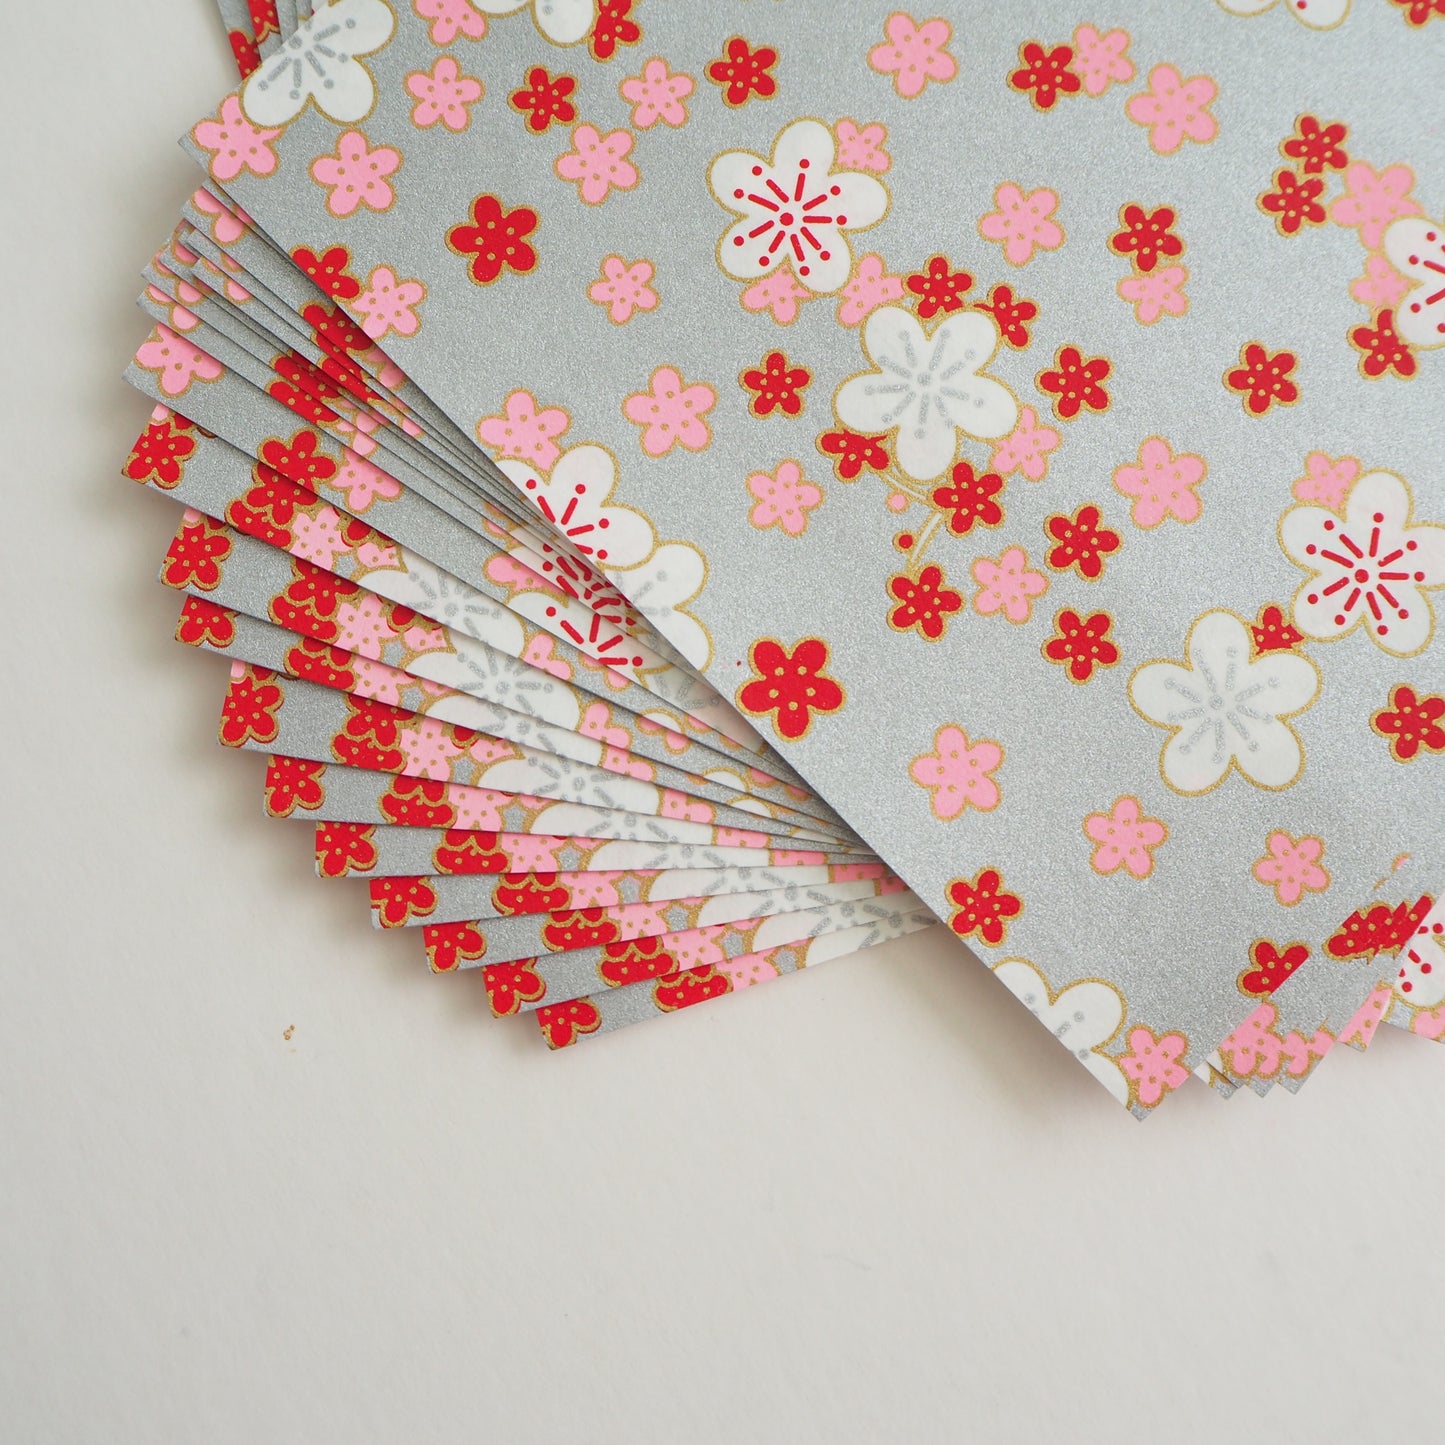 Pack of 20 Sheets 14x14cm Yuzen Washi Origami Paper HZ-491 - Red Pink Cherry Blossom Silver